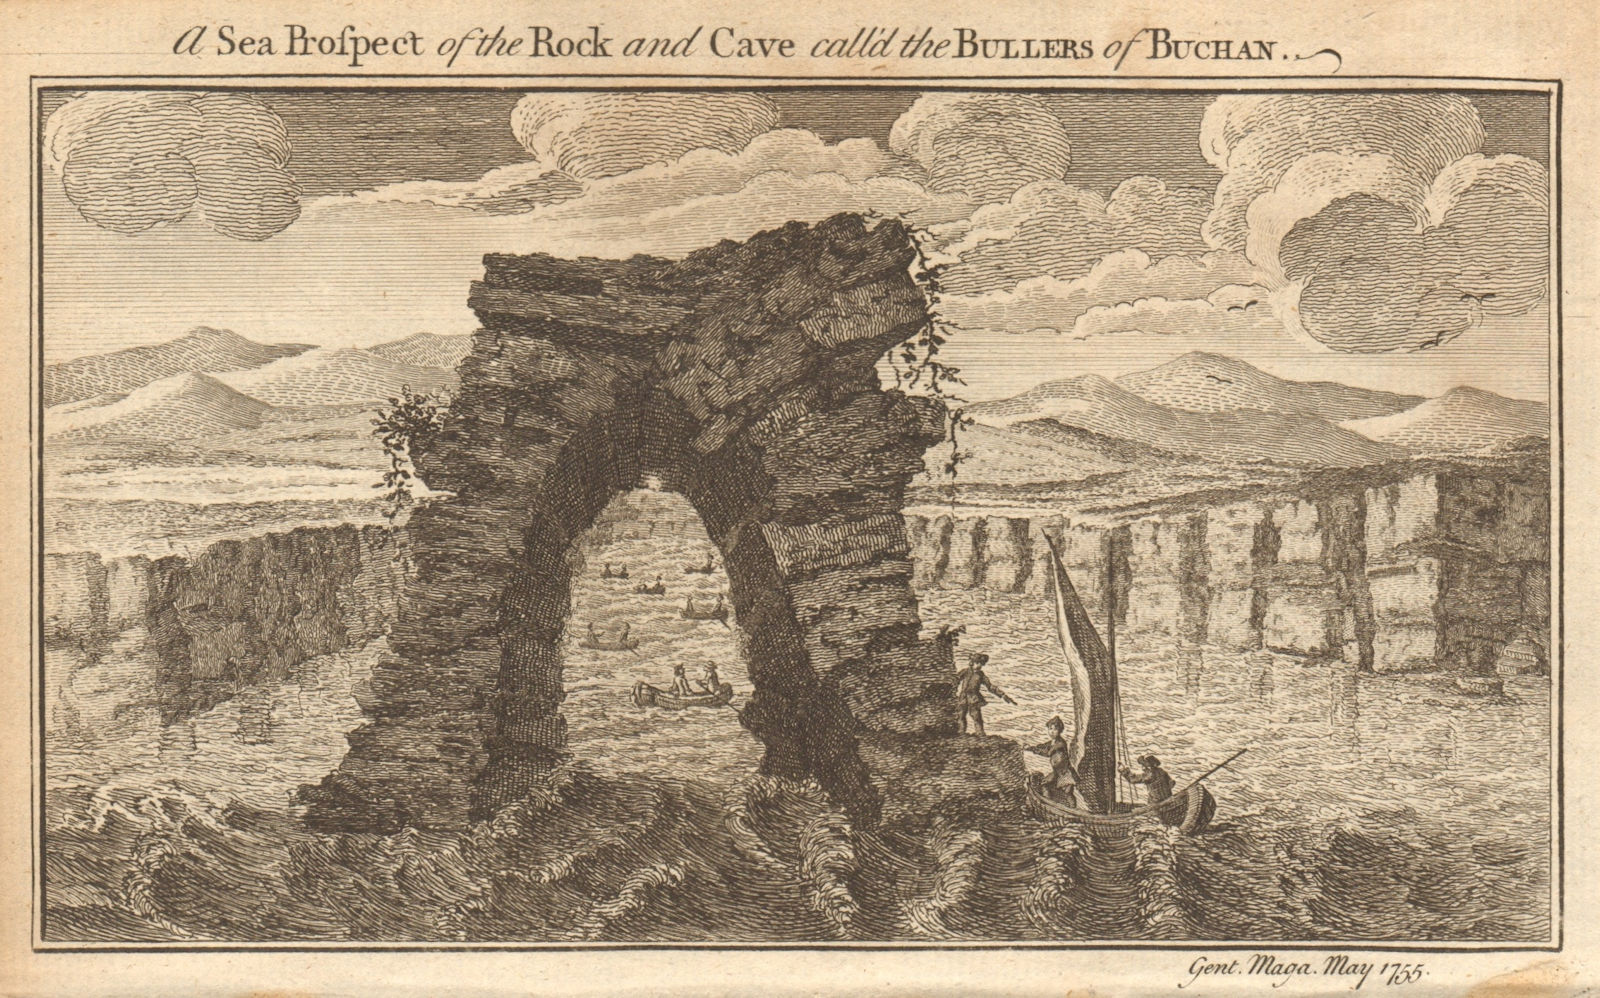 A sea prospect of the rock and cave called the Bullers of Buchan. Scotland 1755